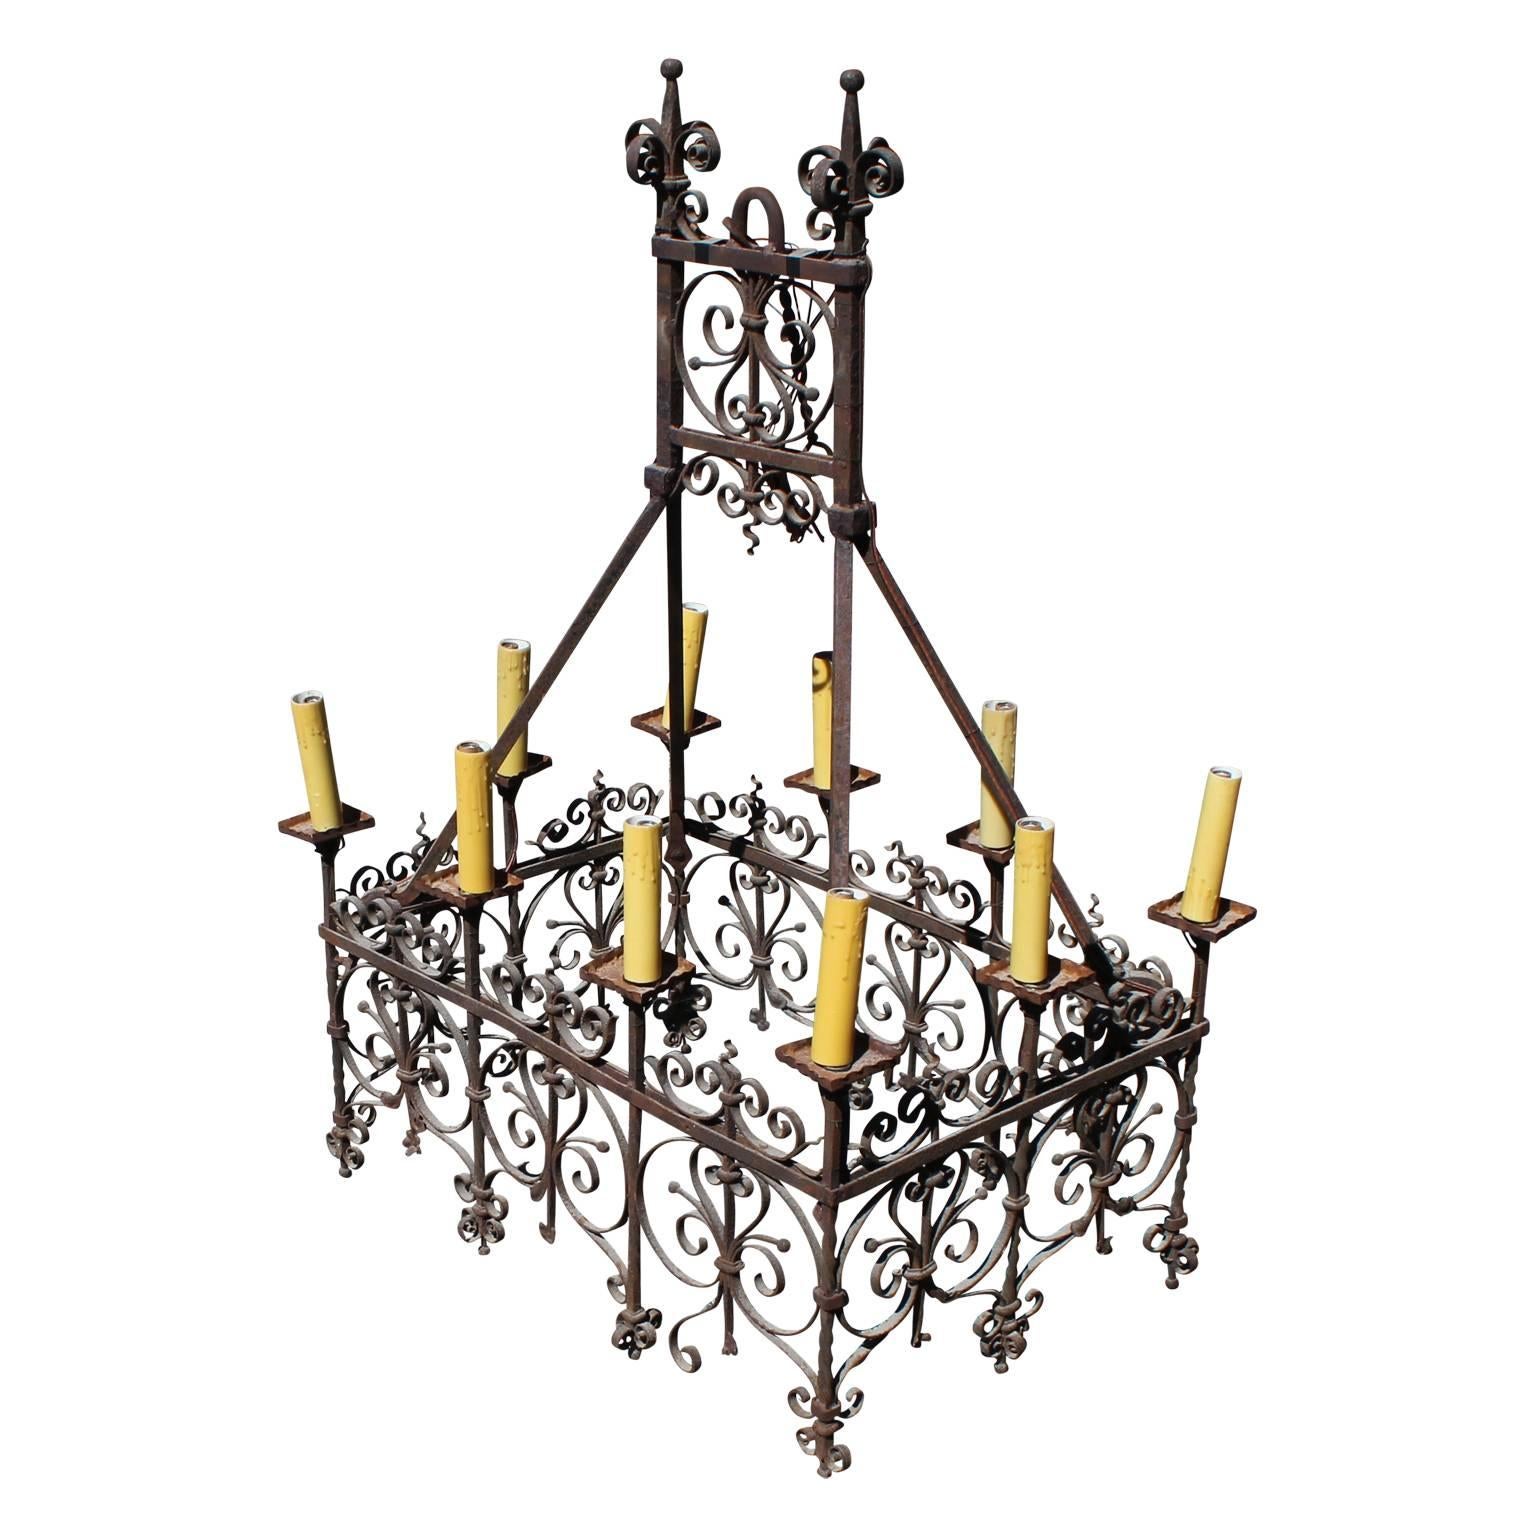 Spanish Colonial Wonderful 18th Century Spanish or French Hand Wrought Iron Chandelier